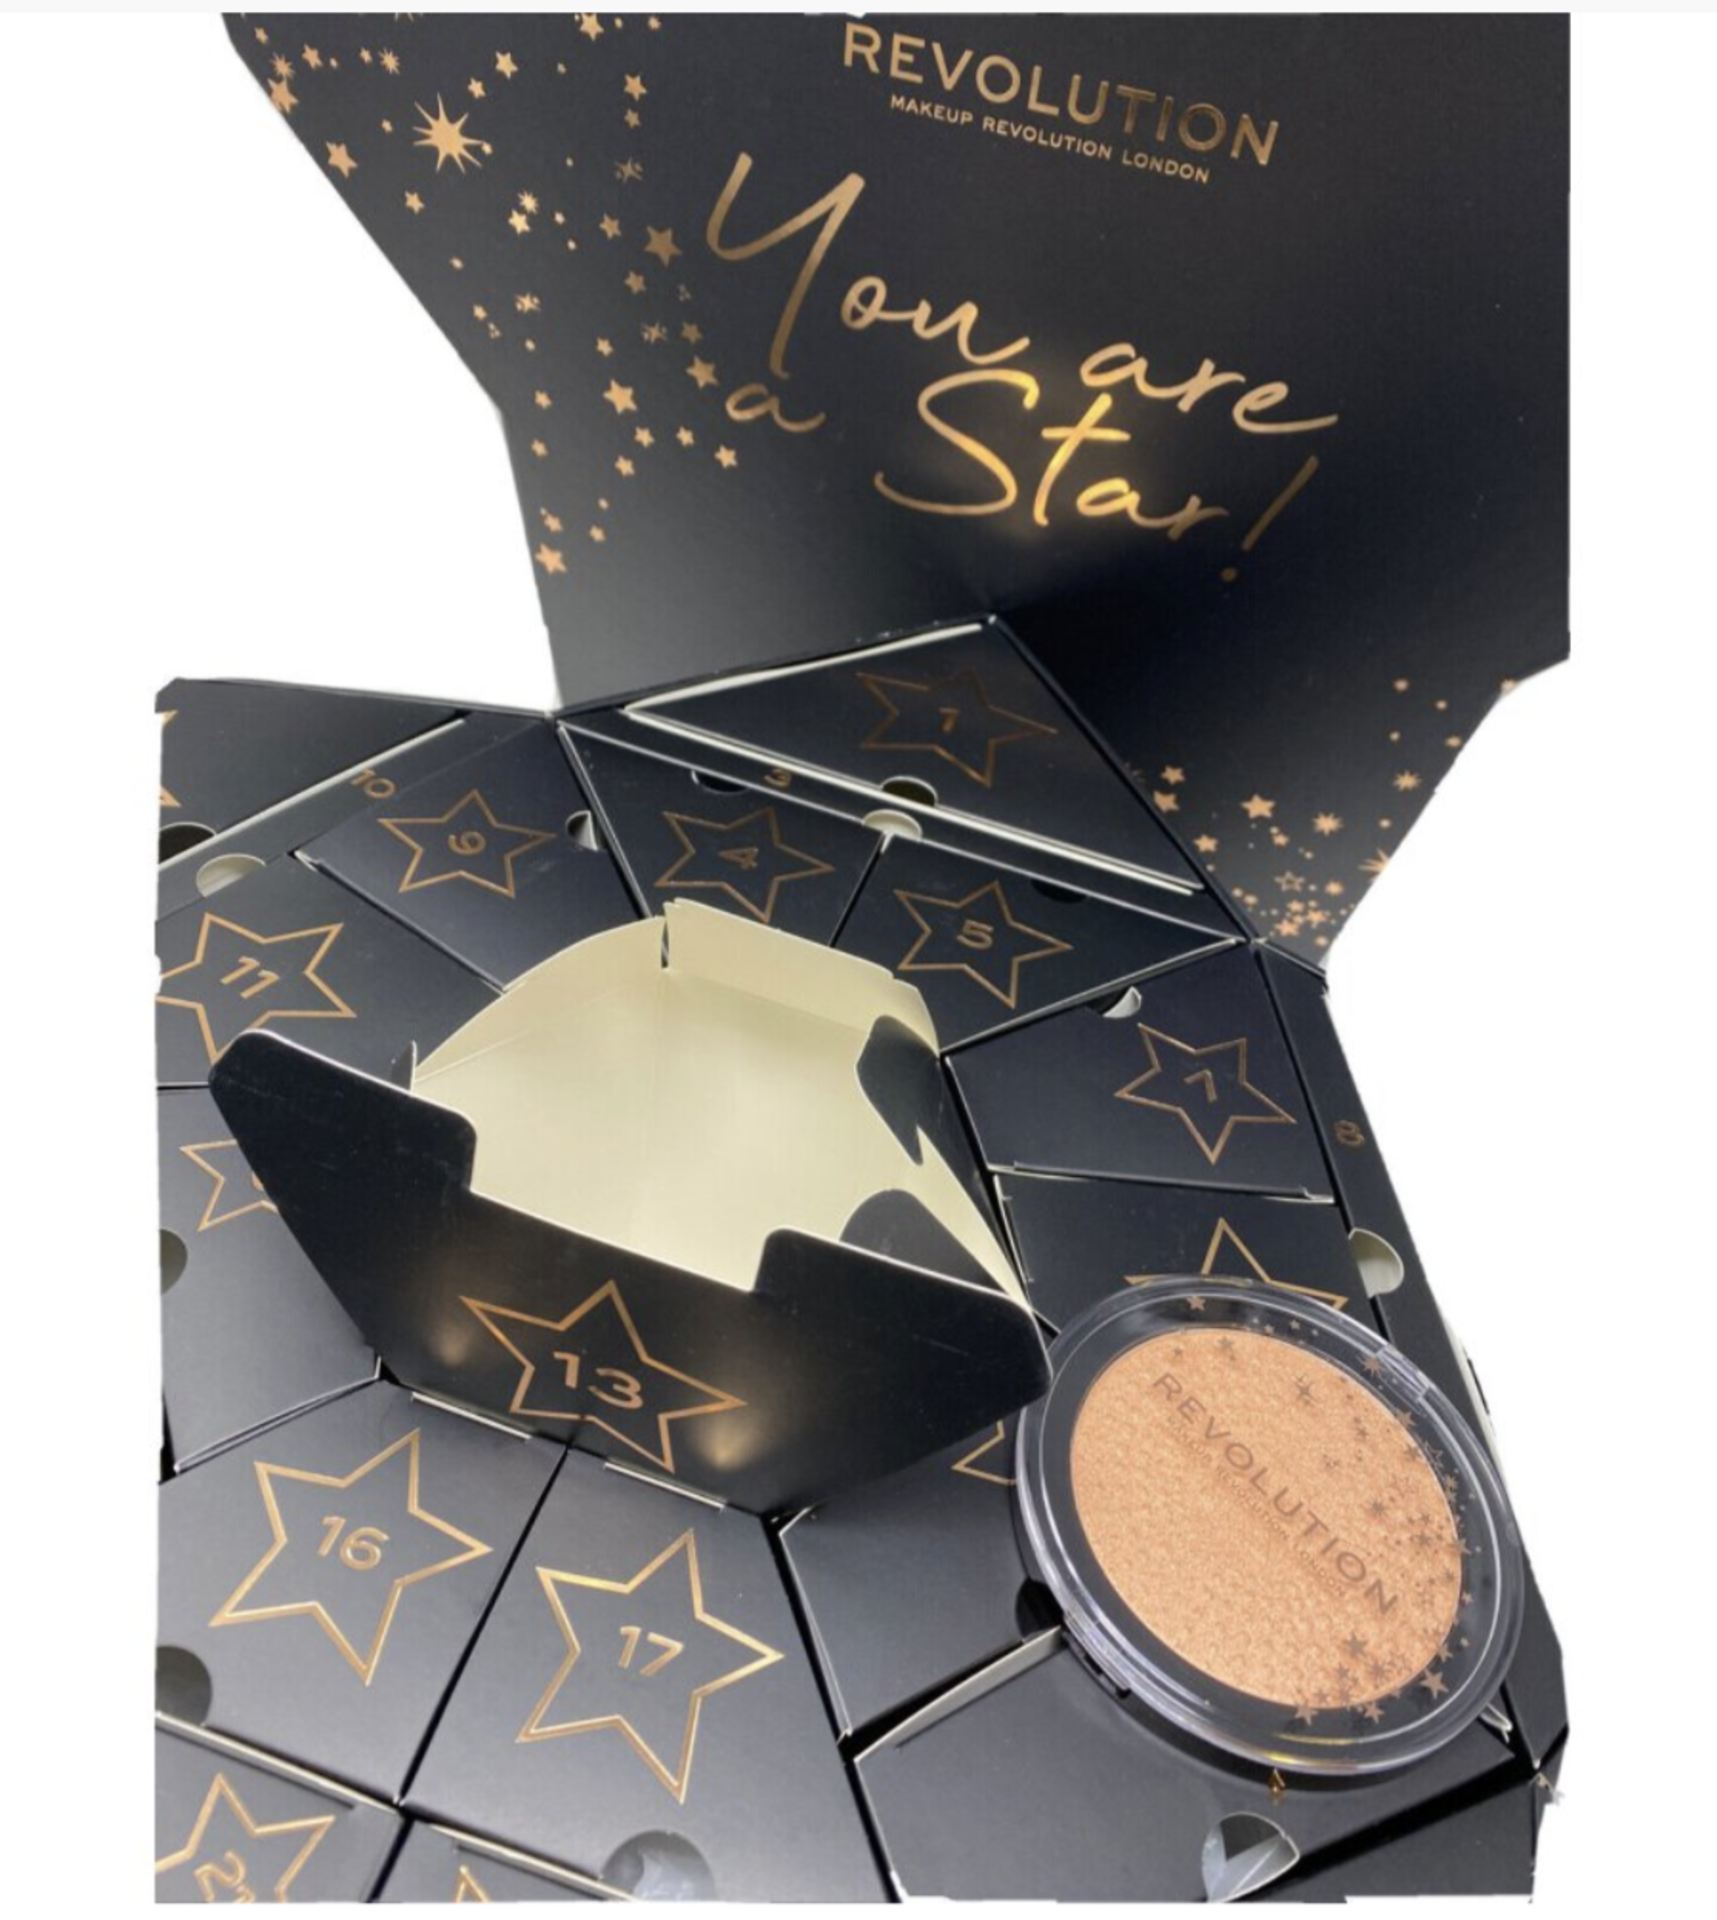 3 x Revolution London NEW Makeup Cosmetic Beauty Star Advent Calendar Boxed - RRP £375 ! - Image 3 of 5